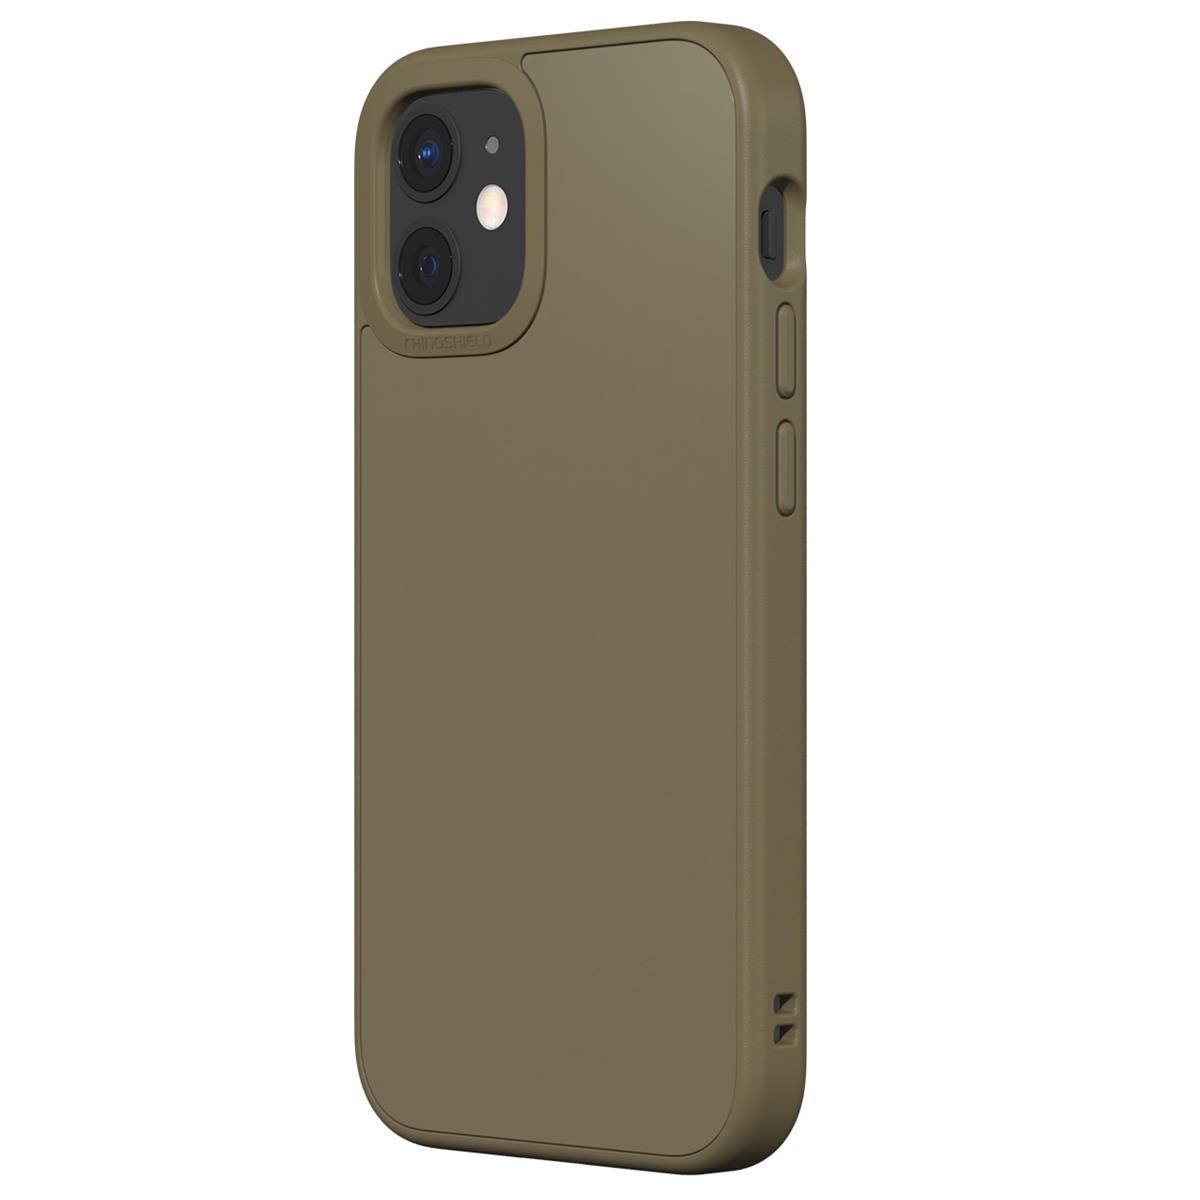 RhinoShield SolidSuit Case for iPhone 12 Pro Max SSA0118752 B&H